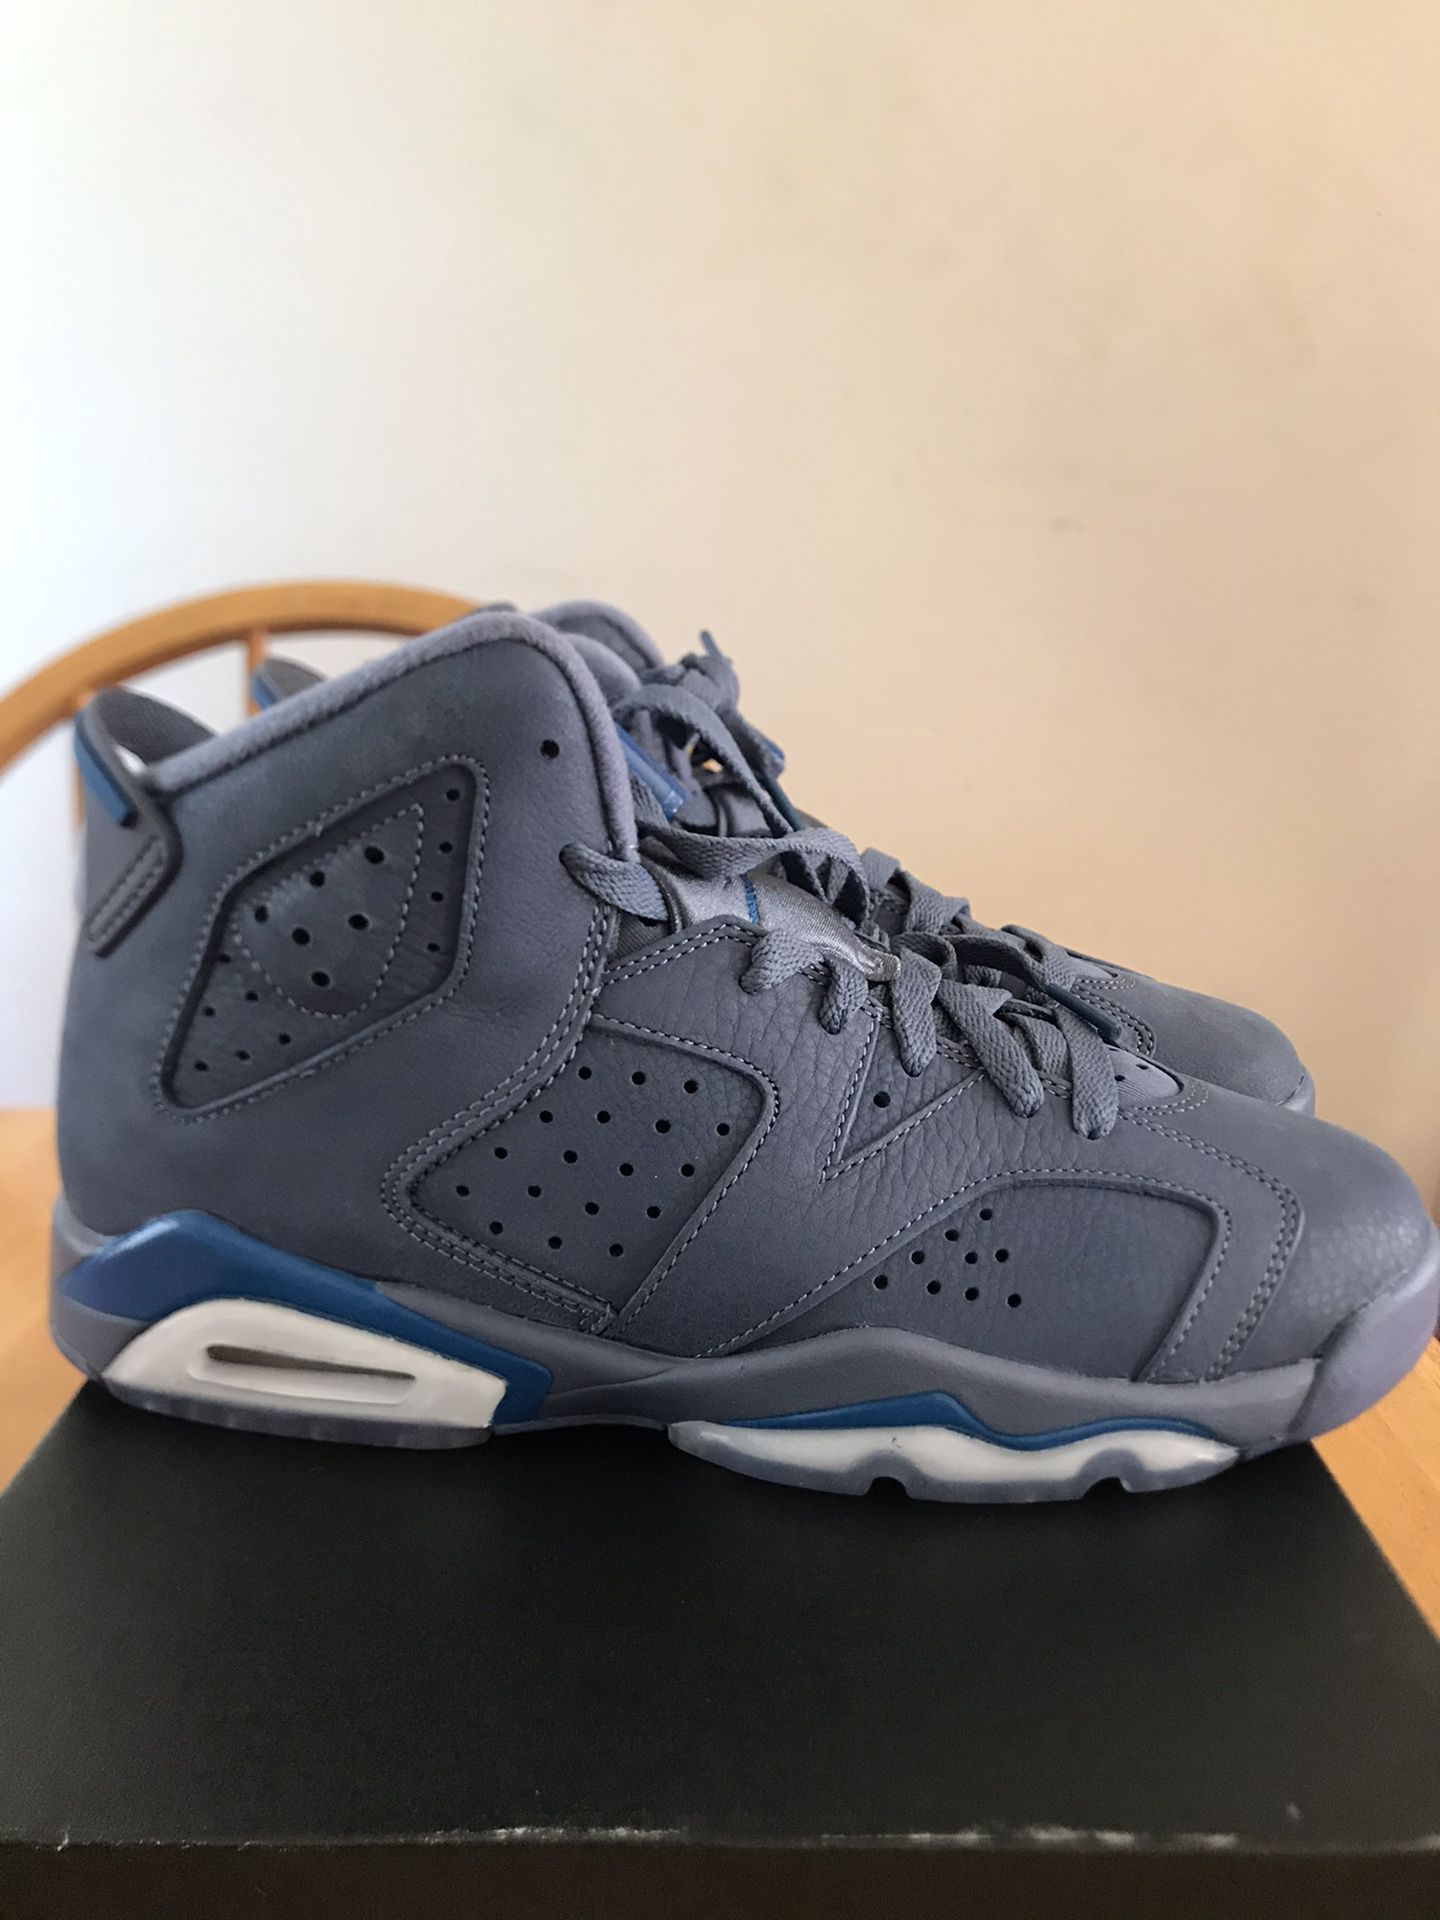 Brand new Nike air Jordan 6 retro diffused blue shoes youth 5.5y, women’s 7